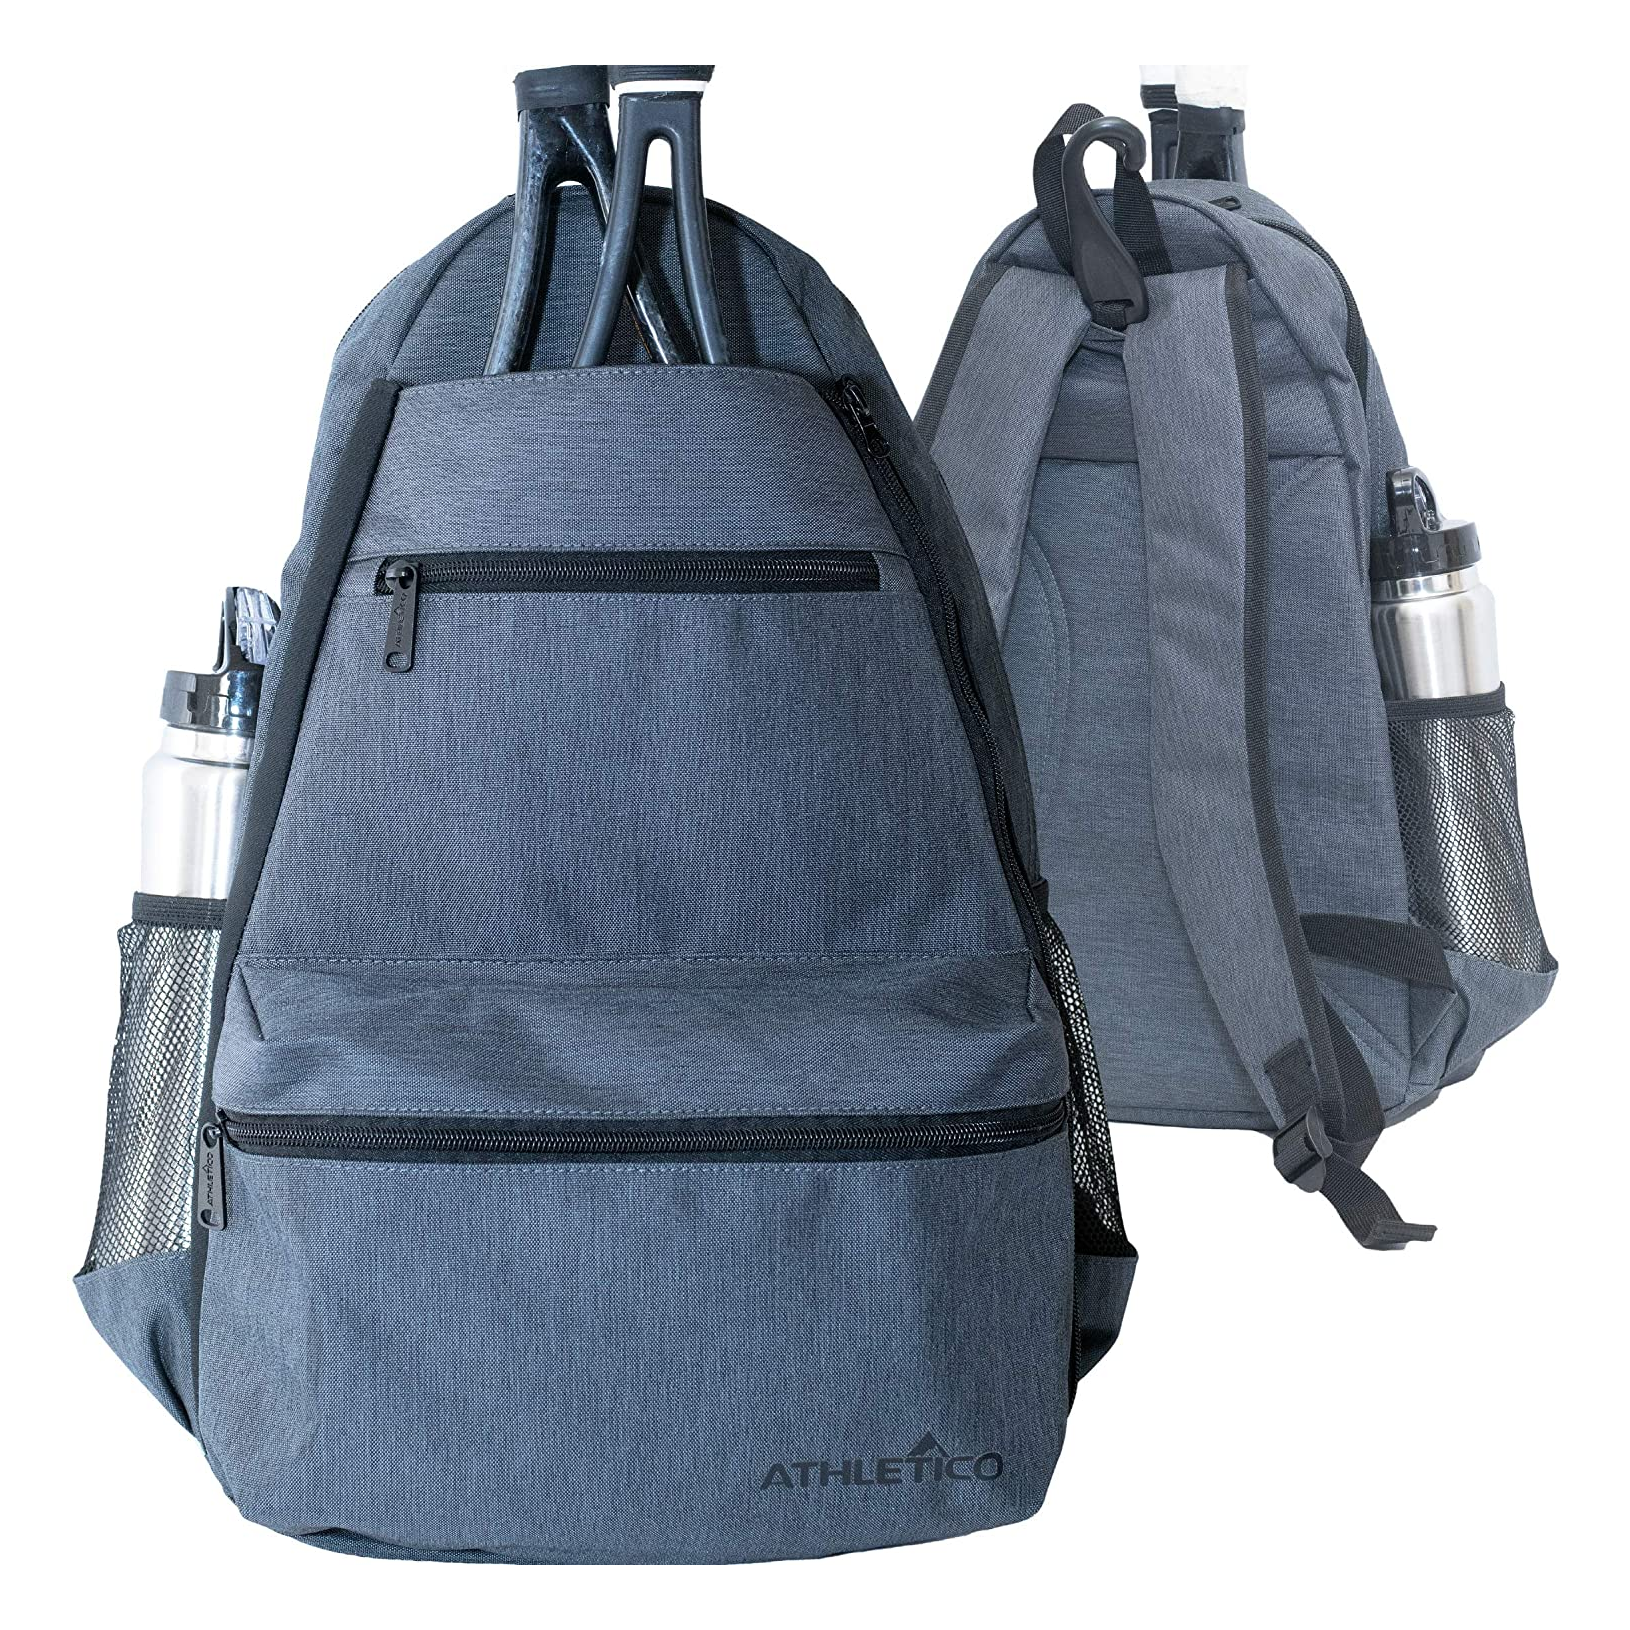 Athletico Compact City Tennis Backpack Front View